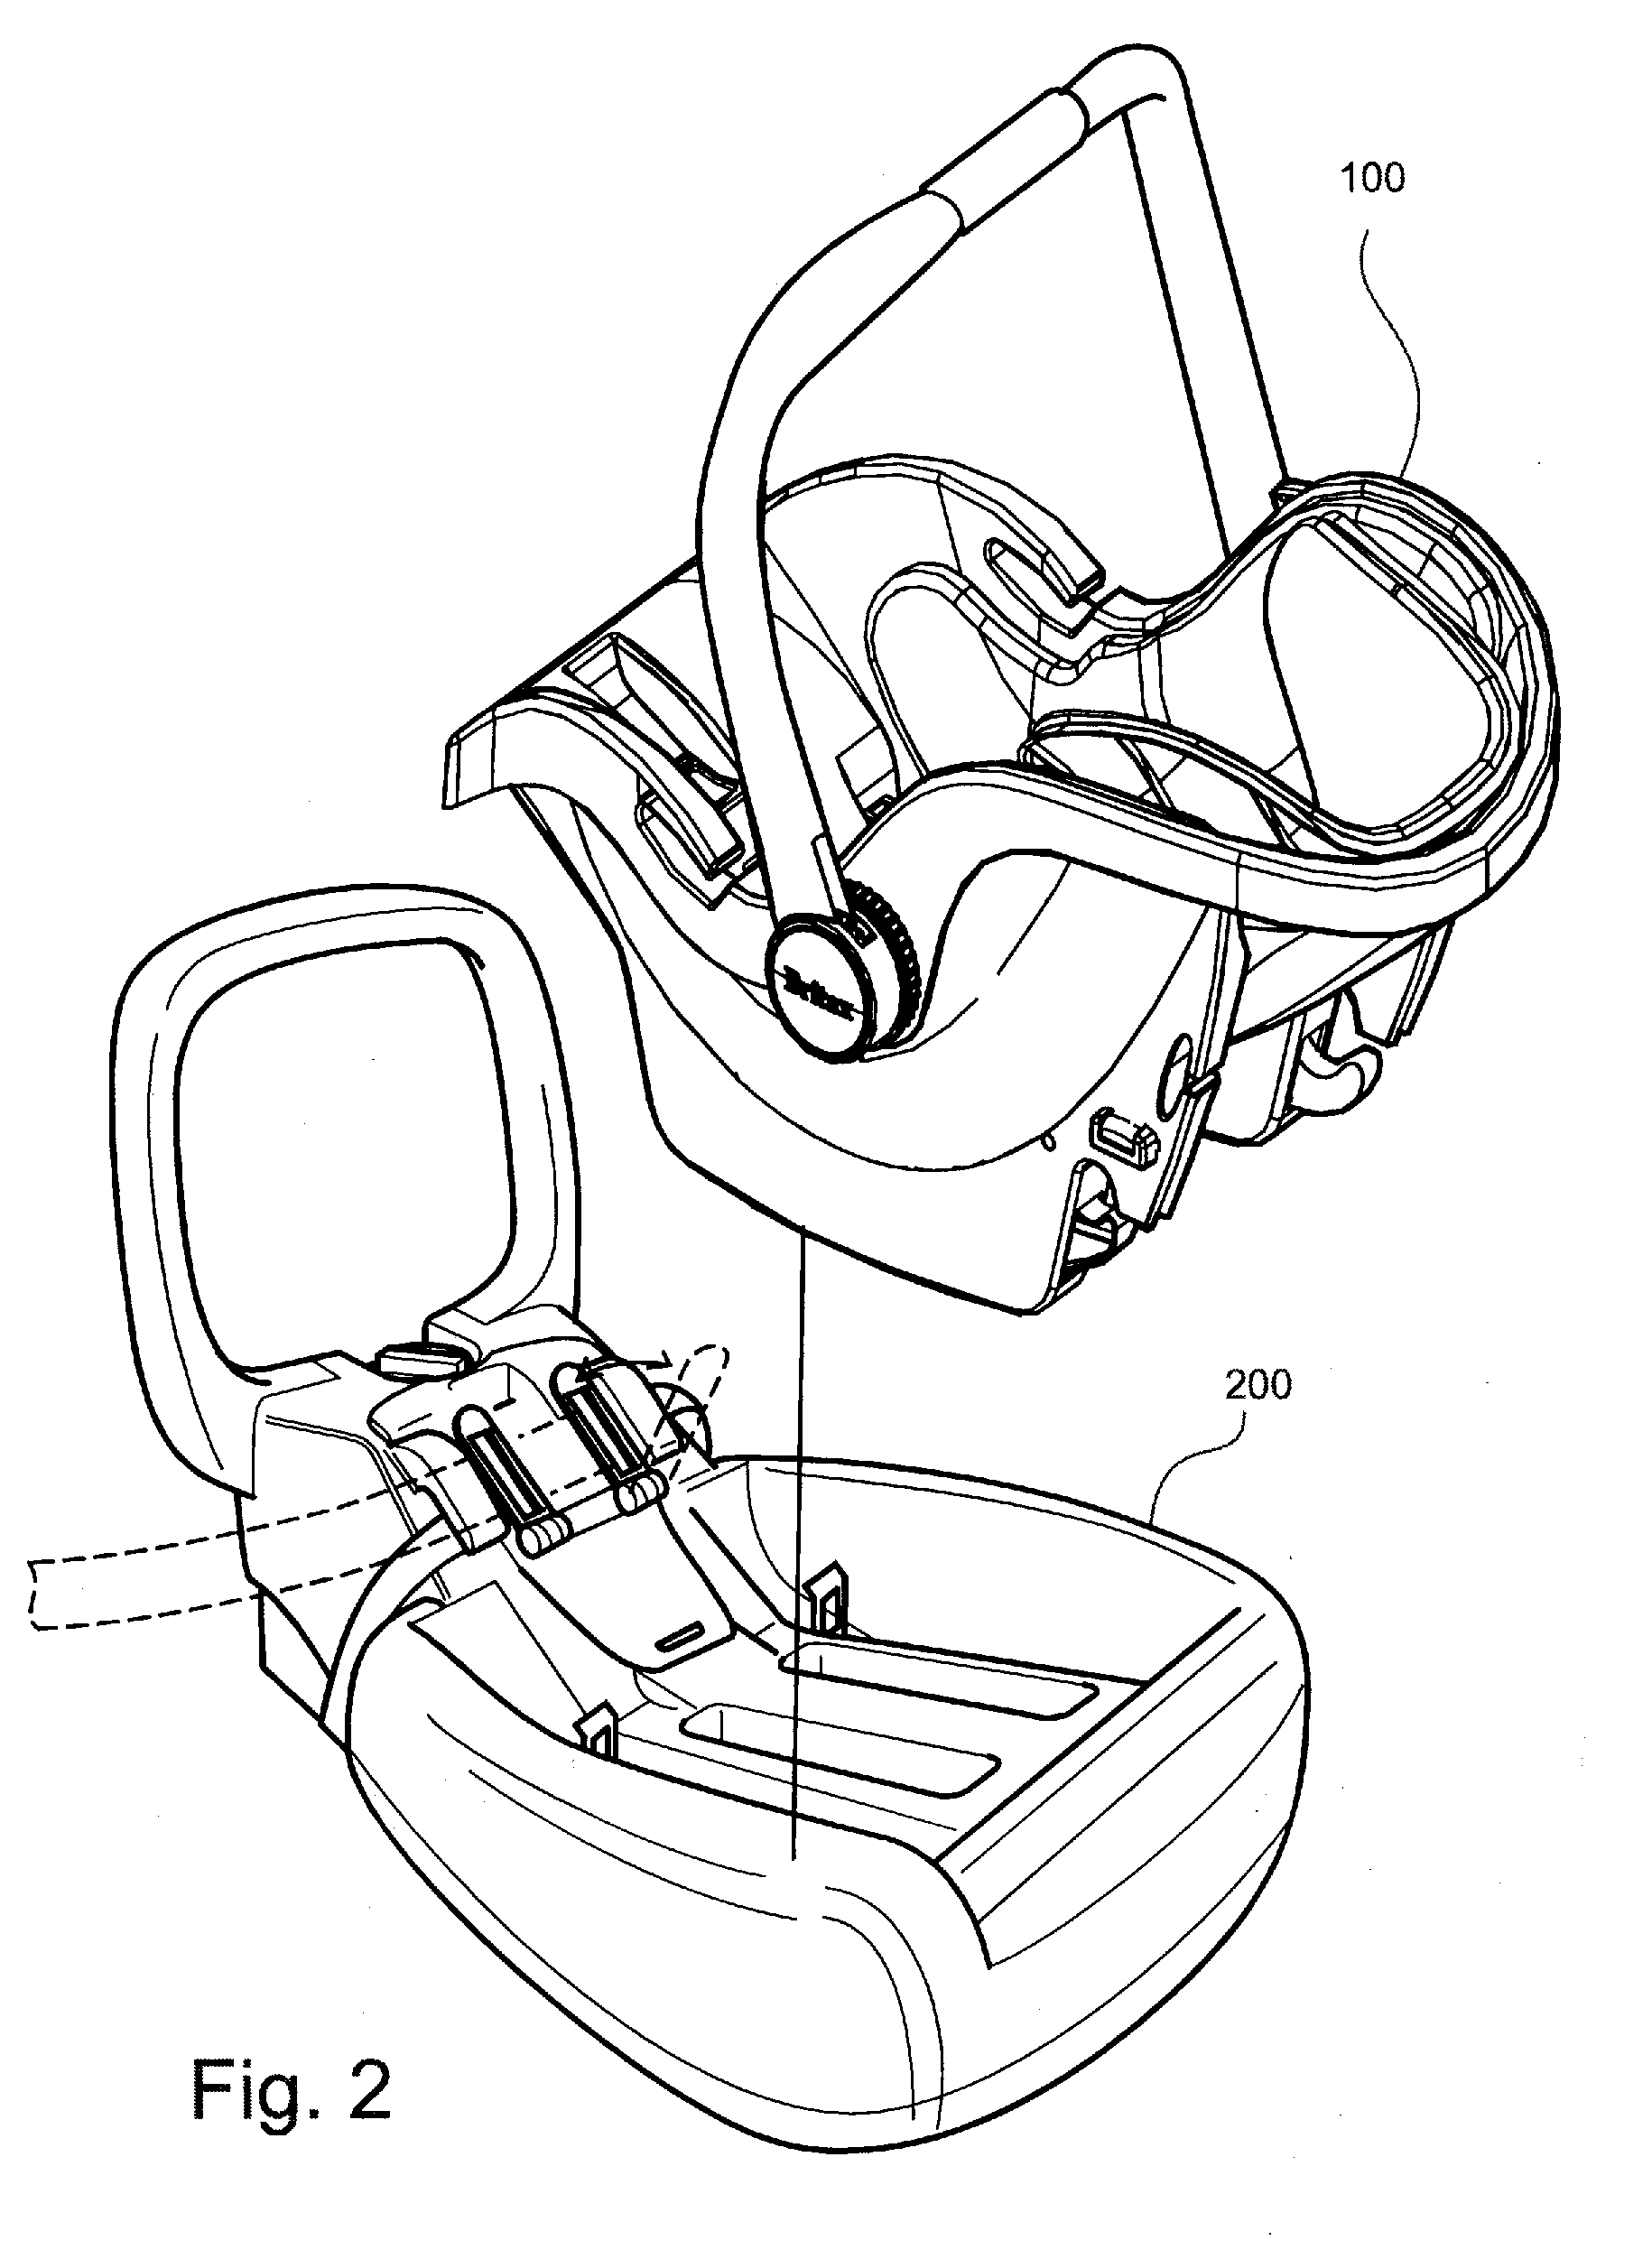 Stroller, child safety seat and child safety system